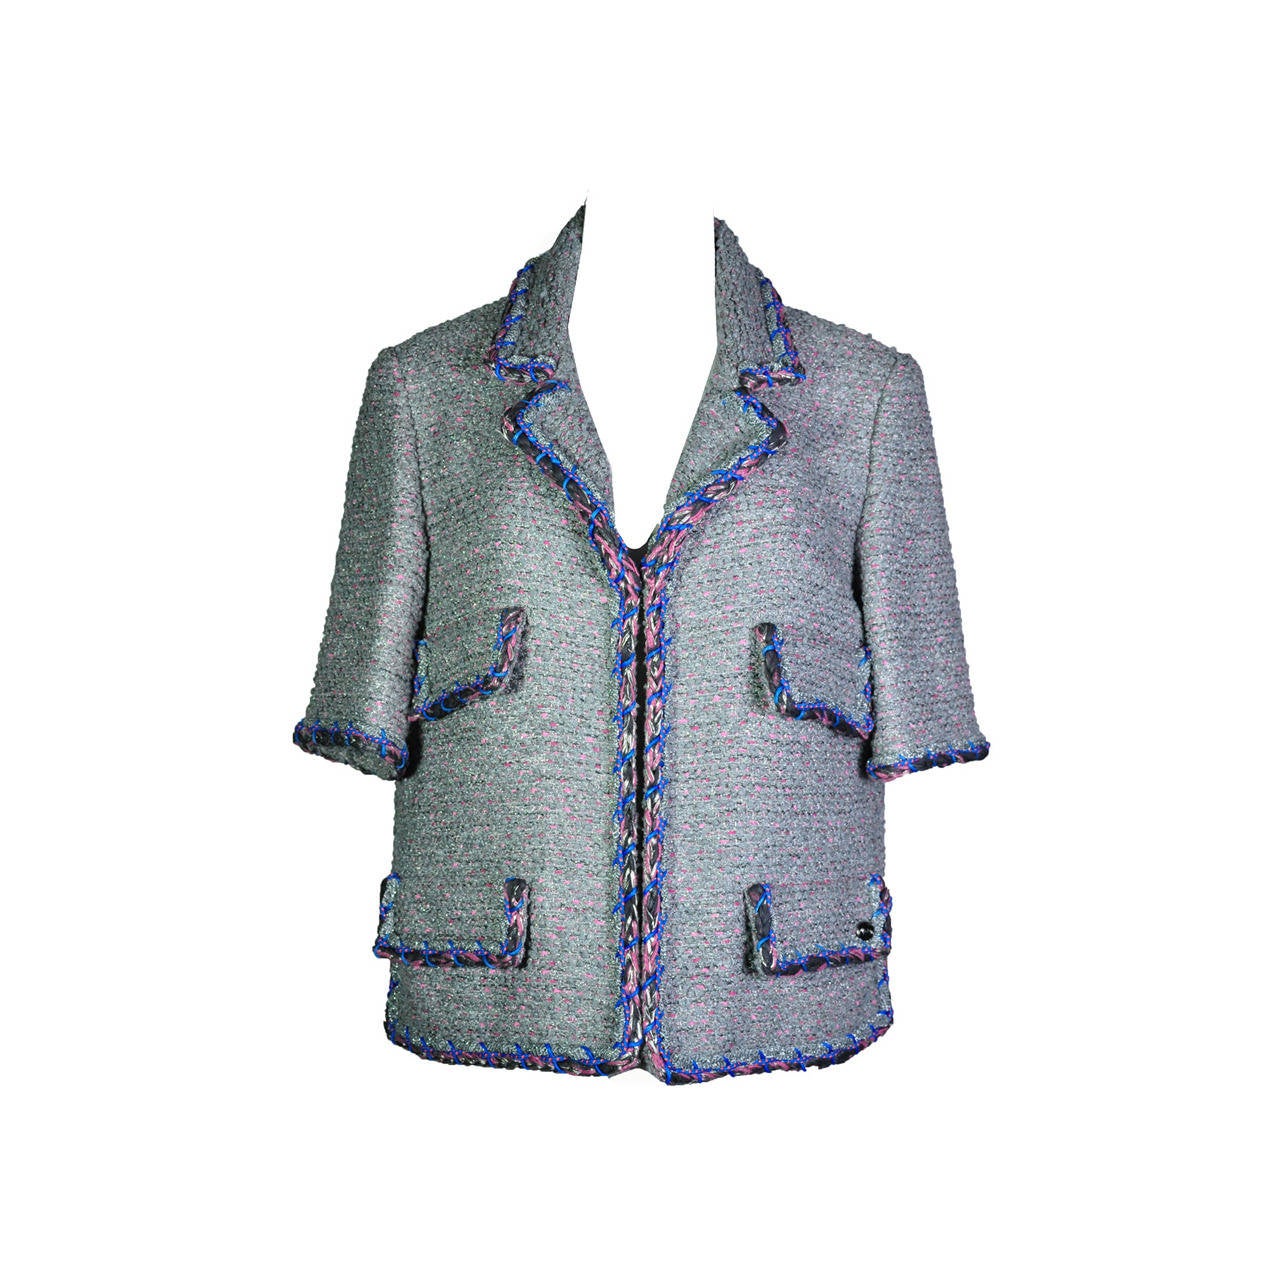 Chanel 2014 S/S Silver Grey and Pink Fantasy Tweed Jacket FR38